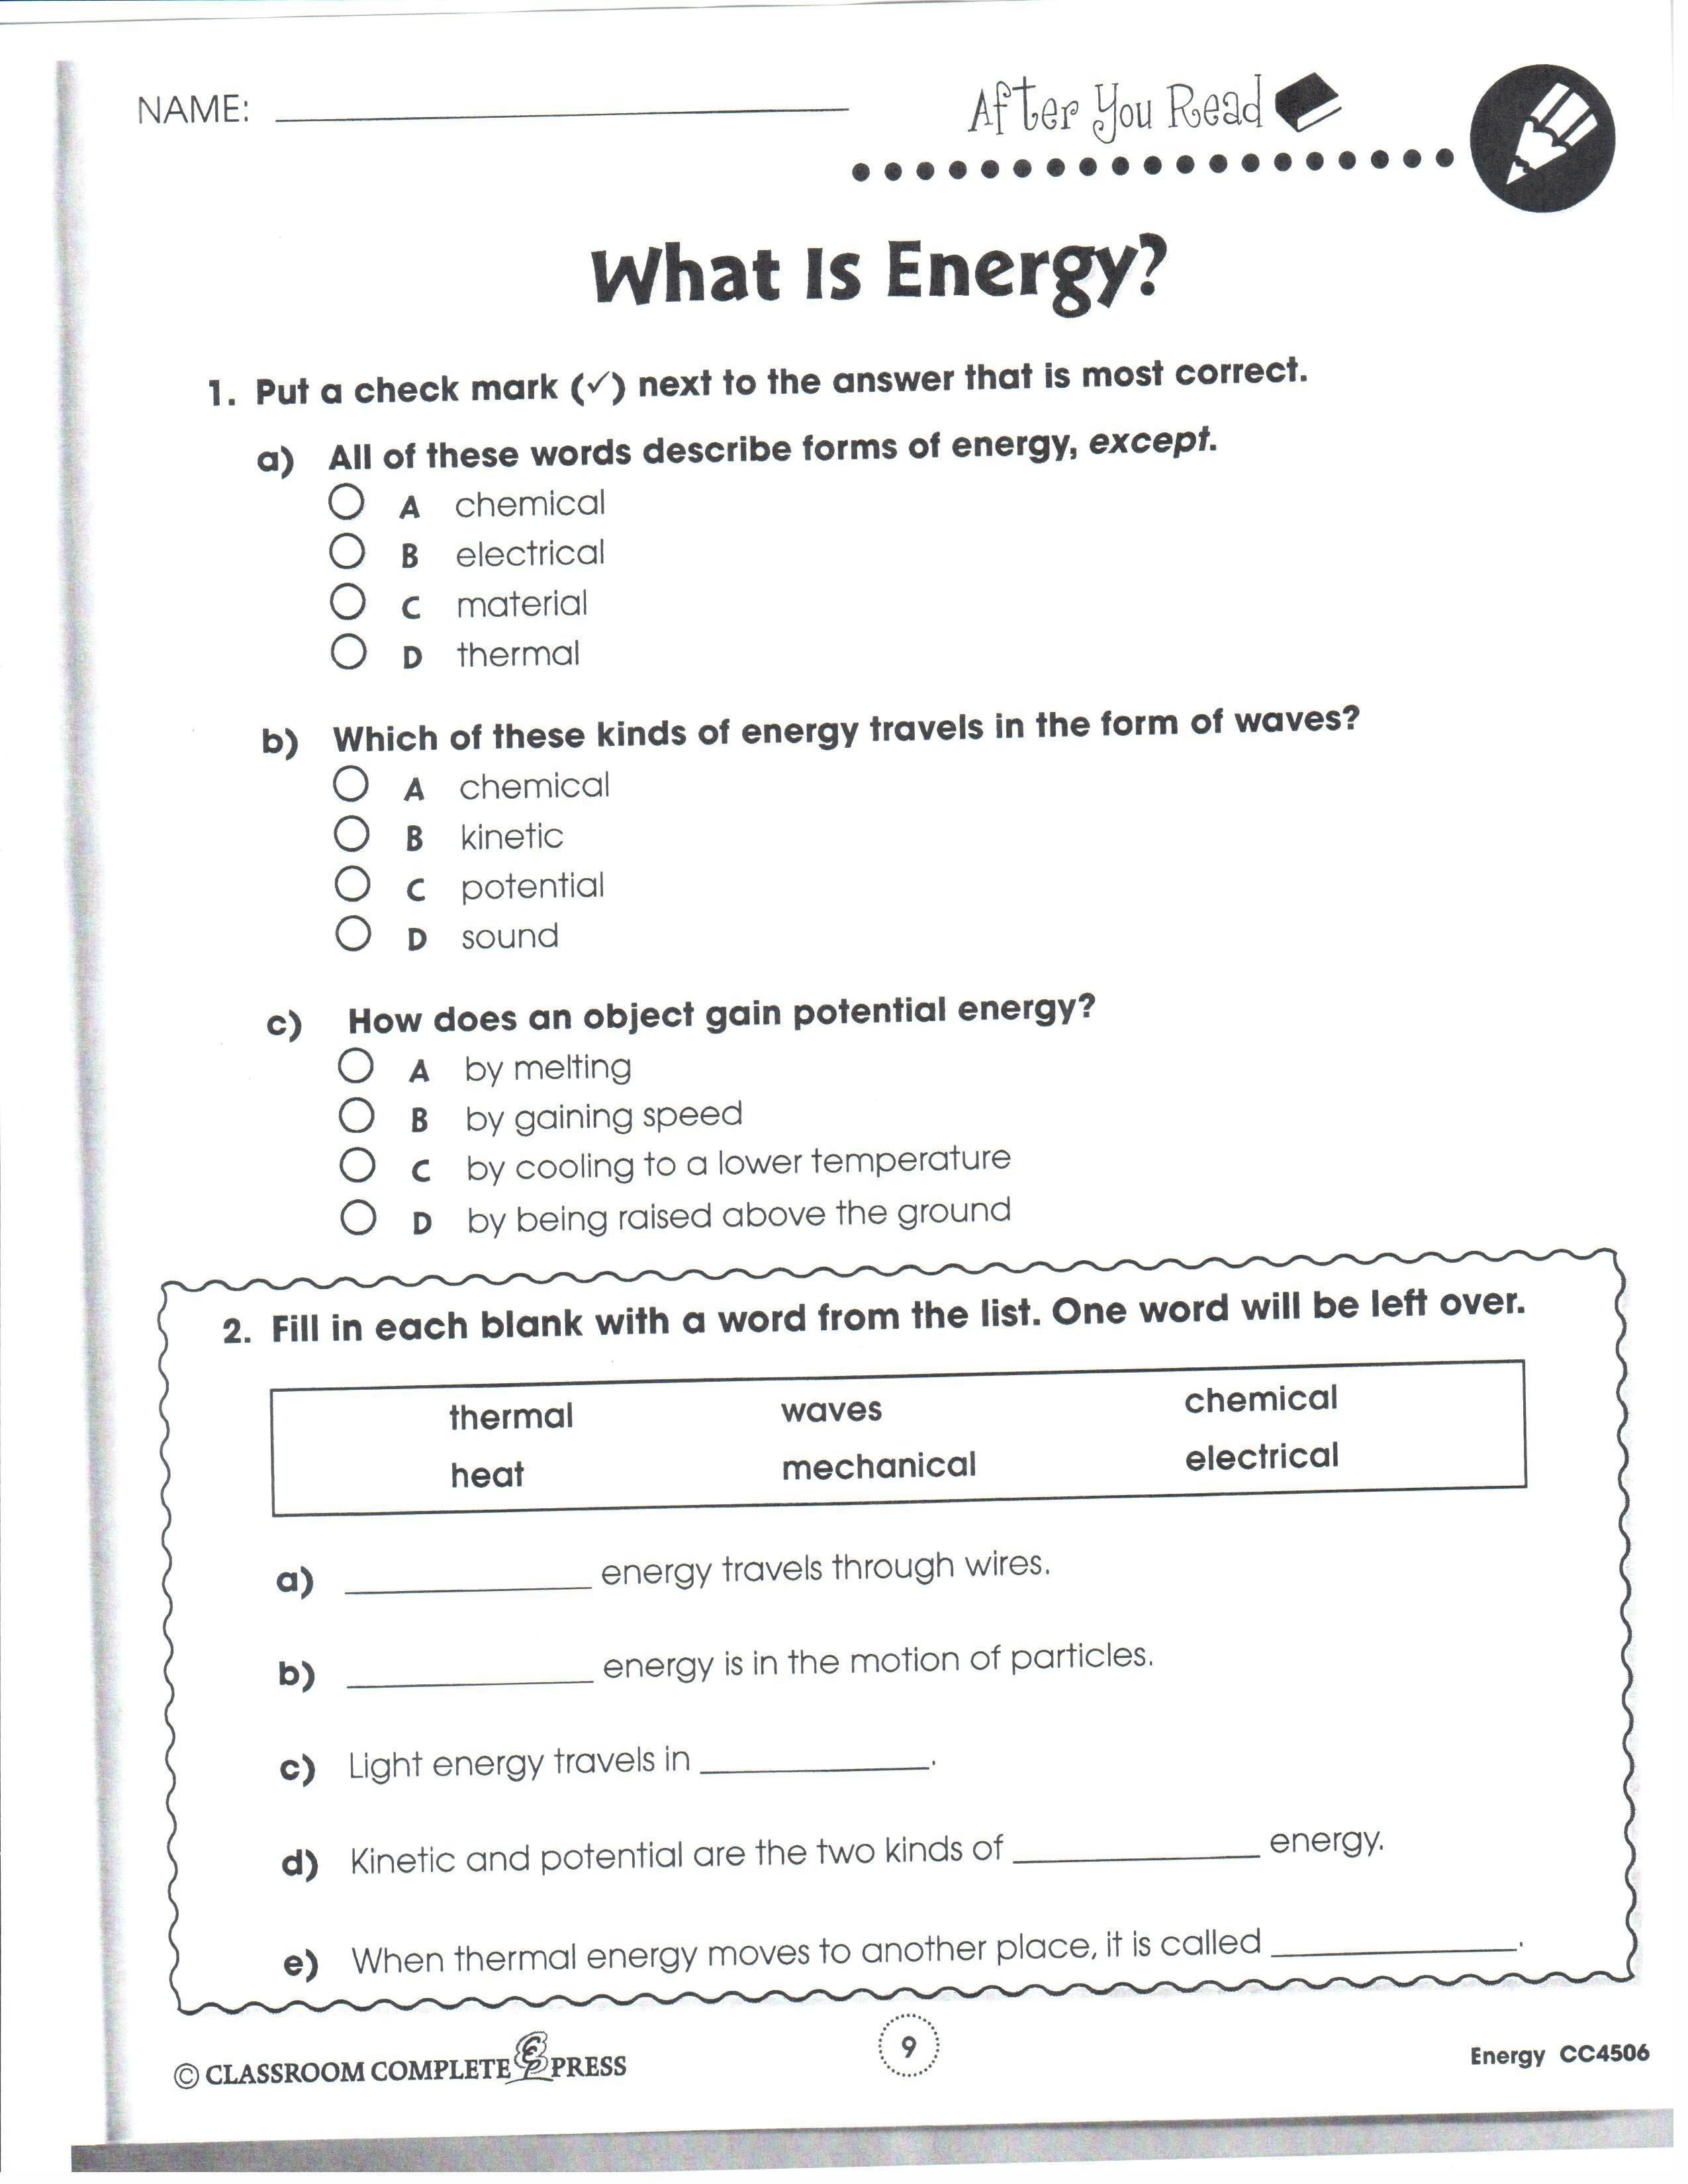 this-is-a-reading-comprehension-worksheet-intended-to-help-readers